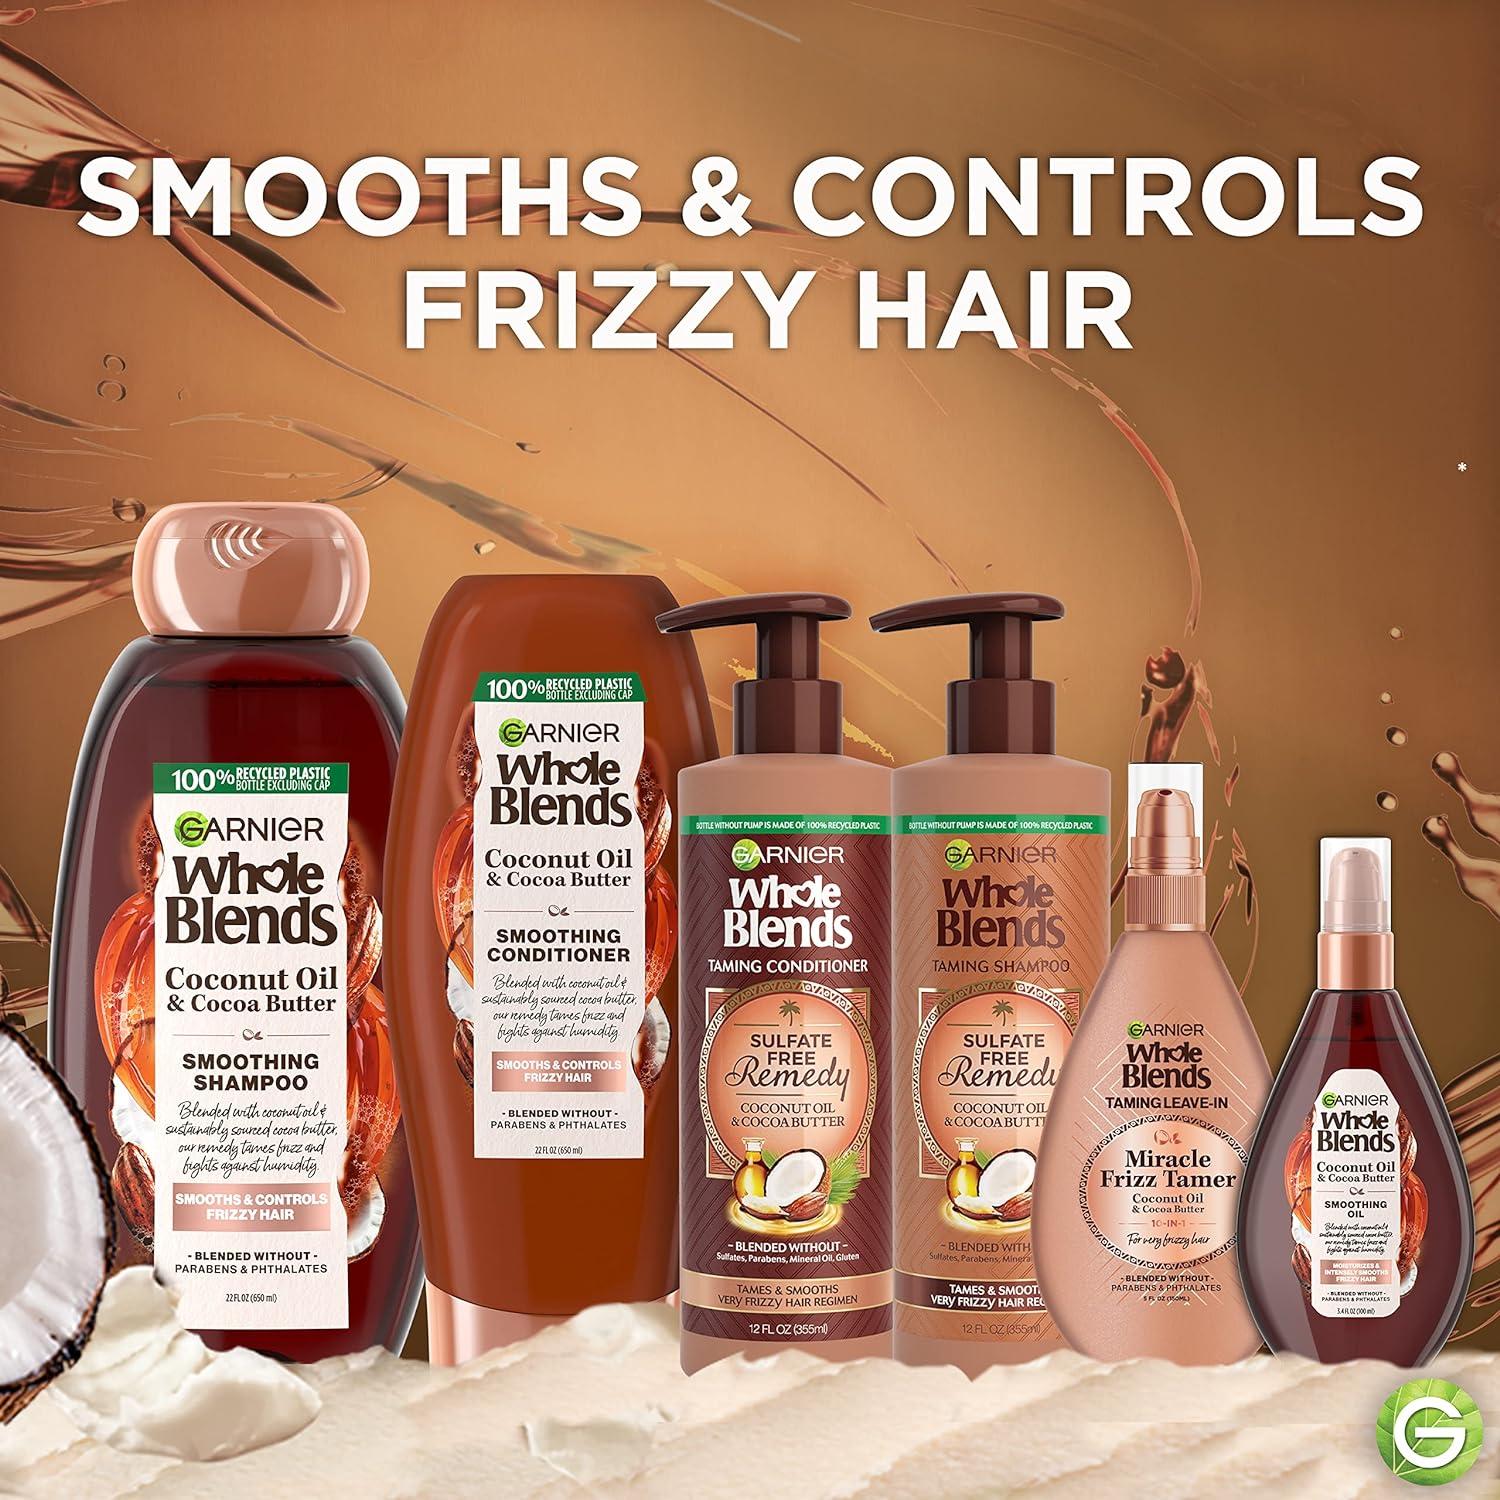 Garnier Whole Blends Sulfate Free Remedy Miracle Frizz Tamer 10-in-1 Leave-In Conditoner for Very Frizzy Hair, Coconut Oil & Cocoa Butter, 5 Fl Oz, 2 Count (Packaging May Vary) : Beauty & Personal Care